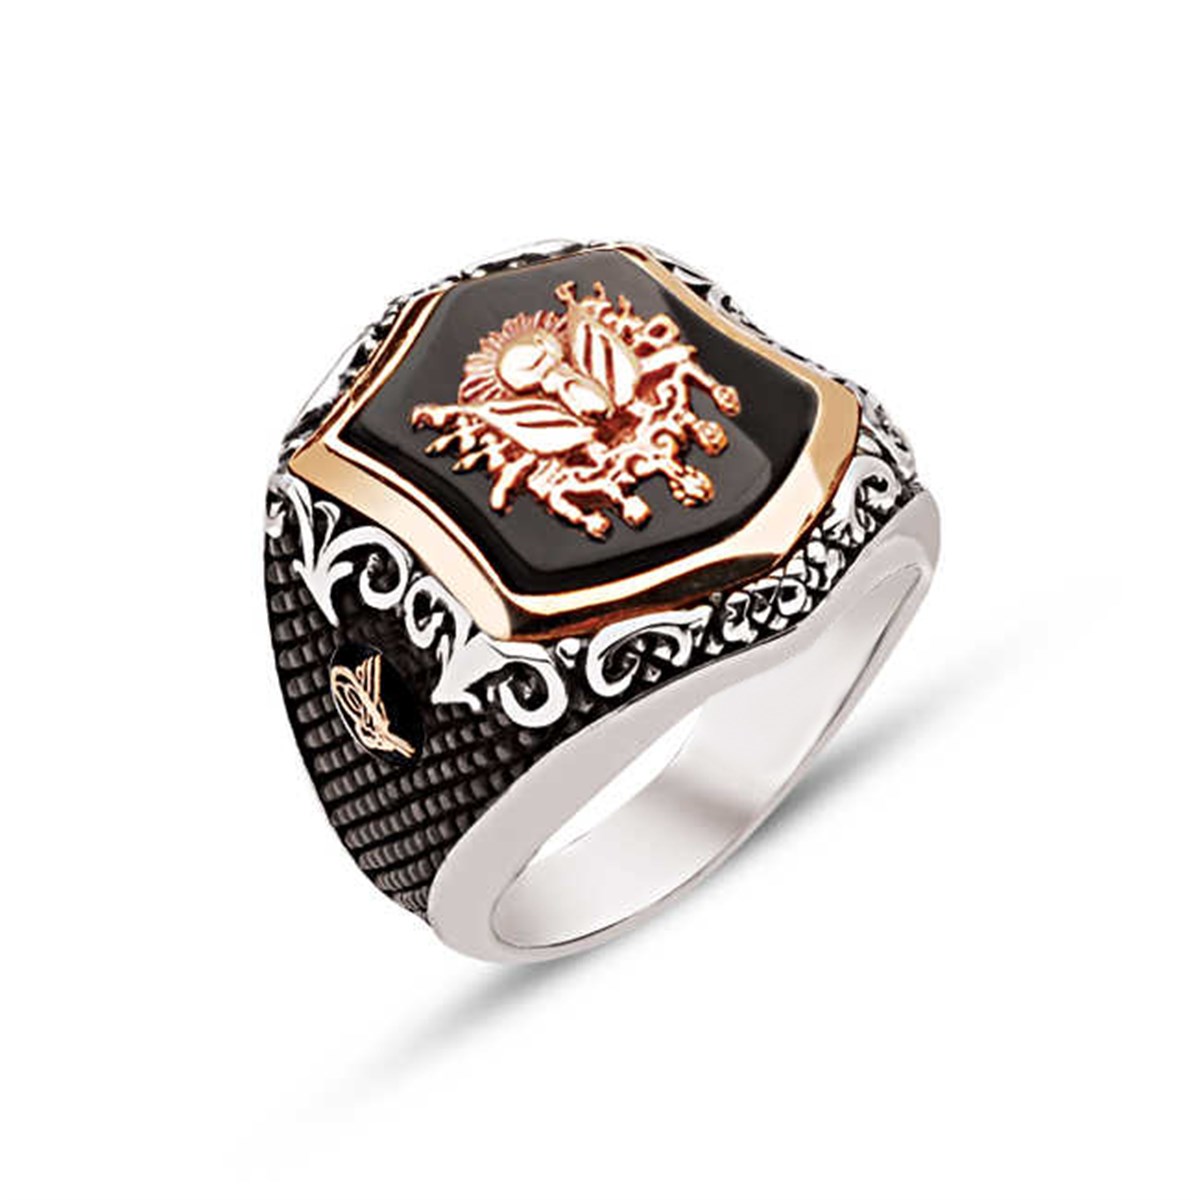 Silver Special Cut Onix Stone Tugra Embroidered Men's Ring